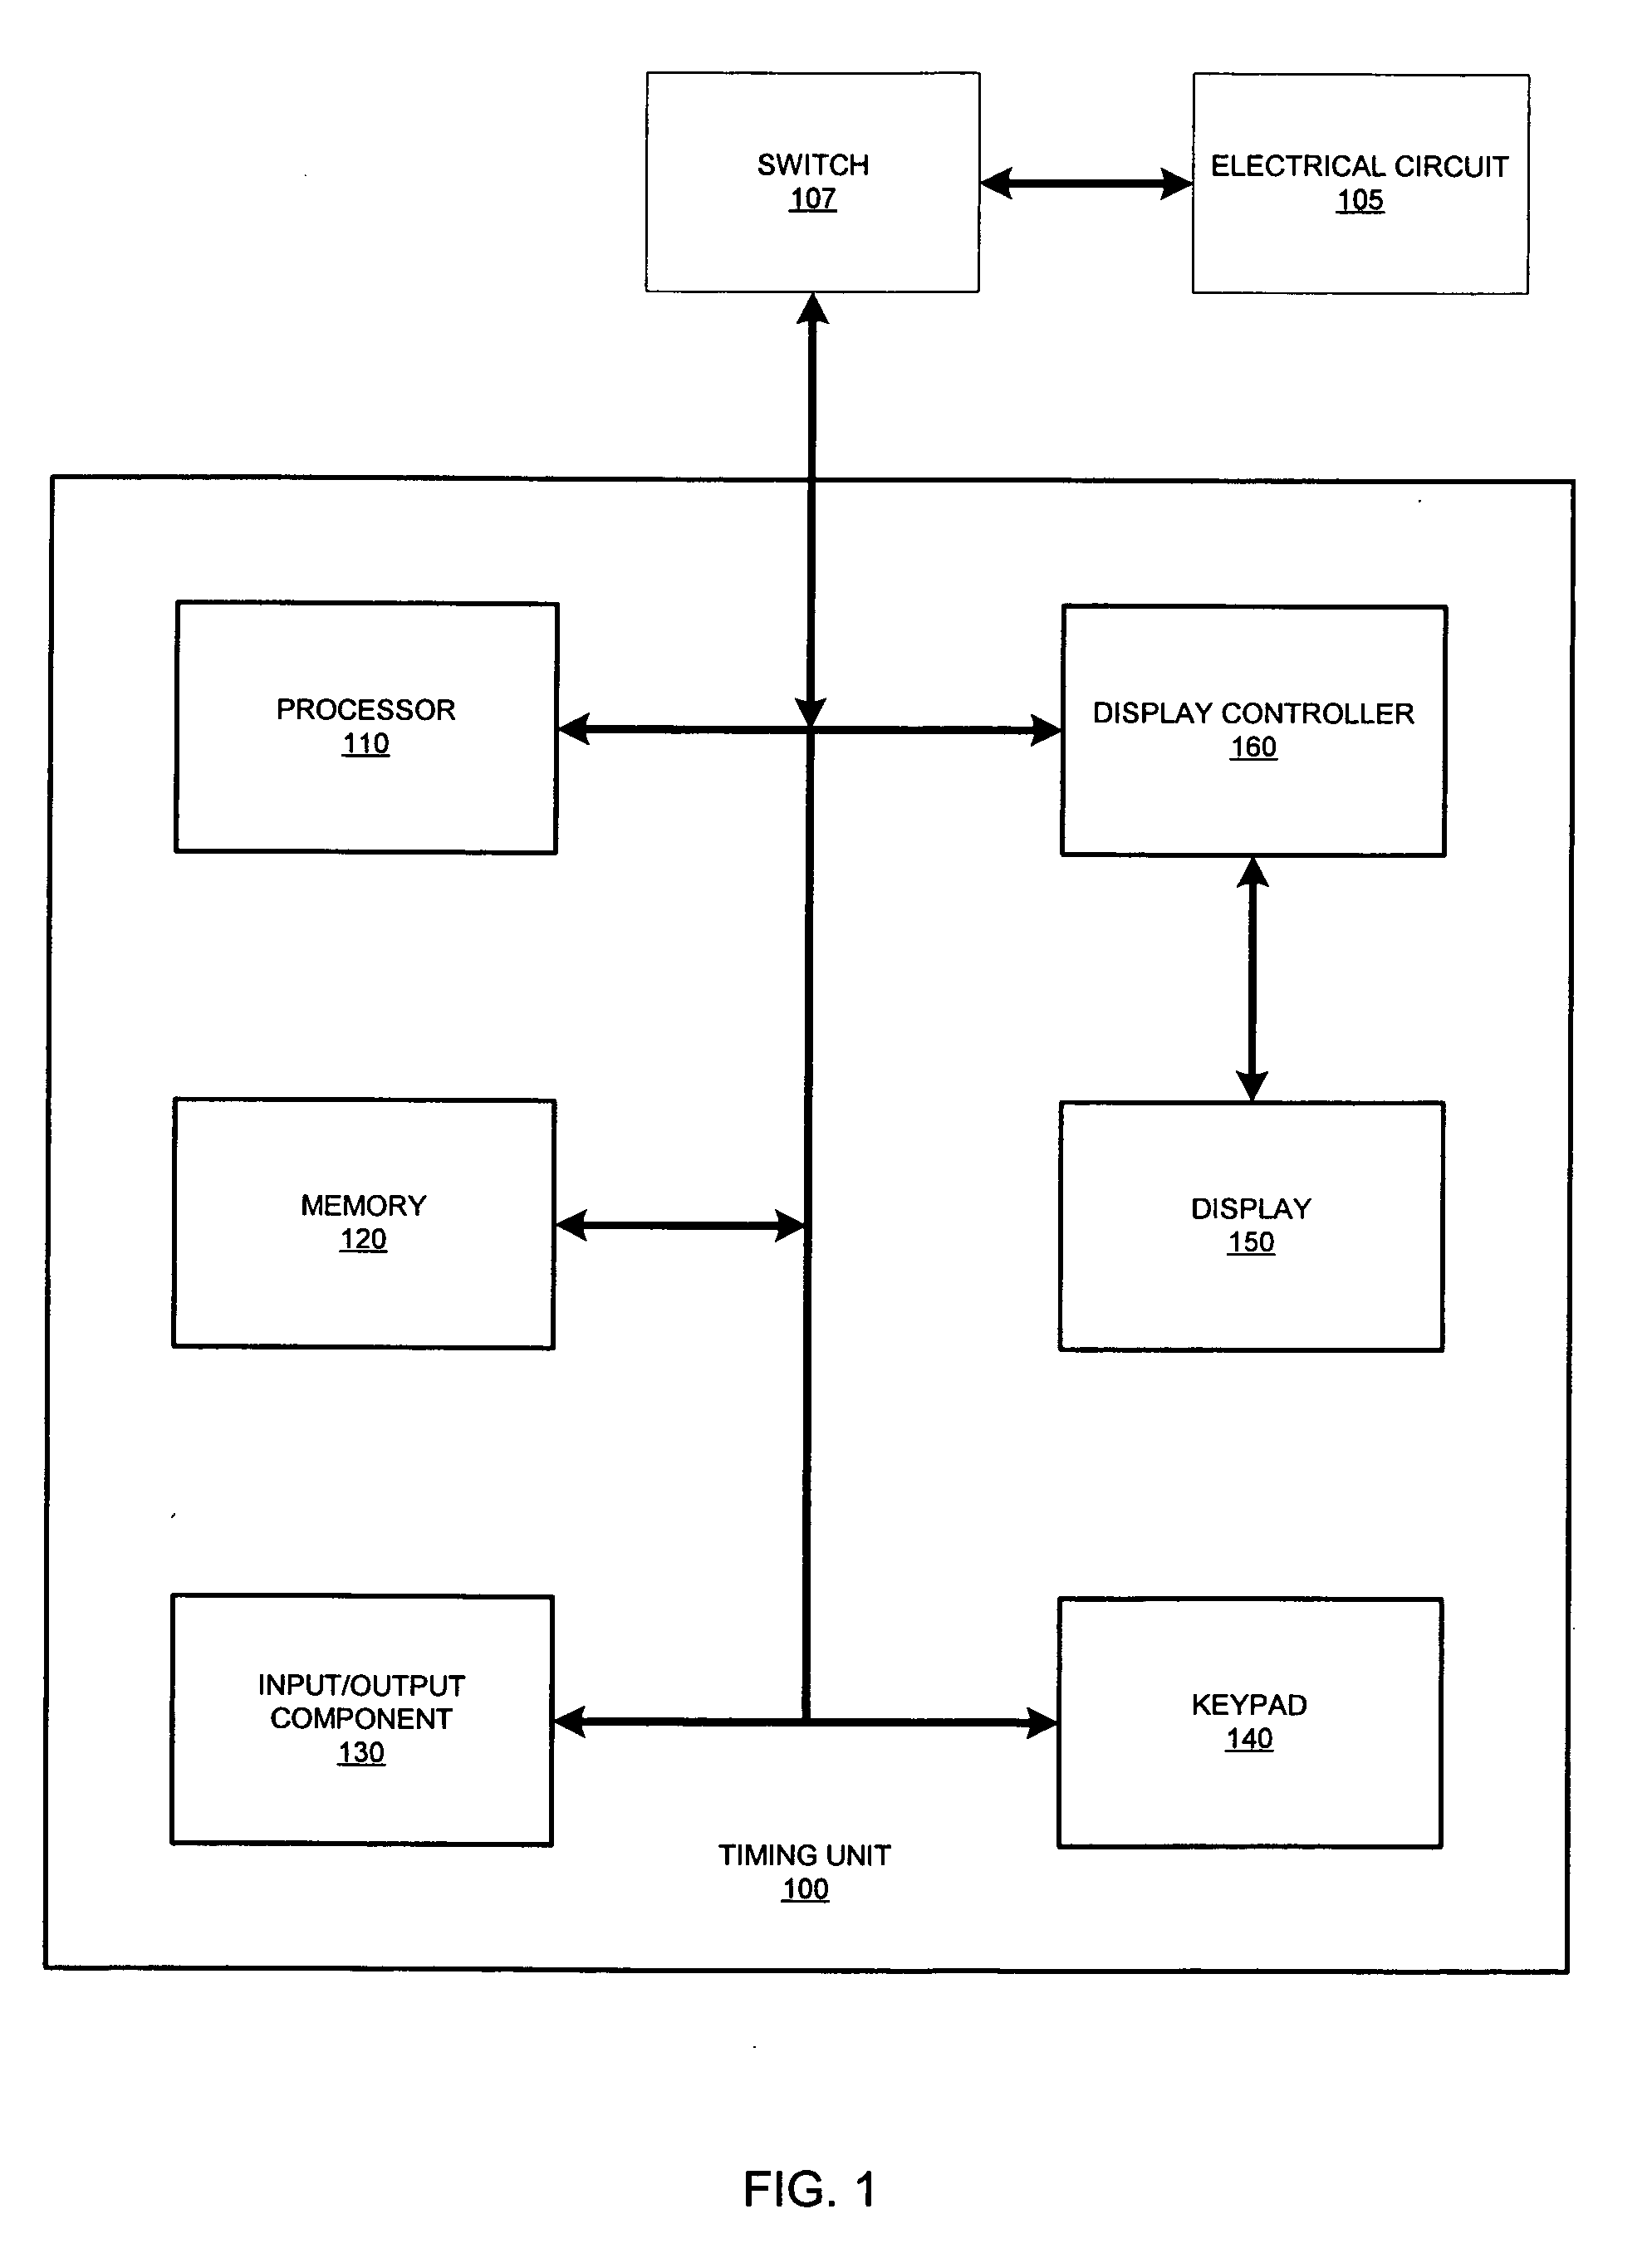 Methods, systems, and articles of manufacture for providing a timing apparatus with an almanac memory